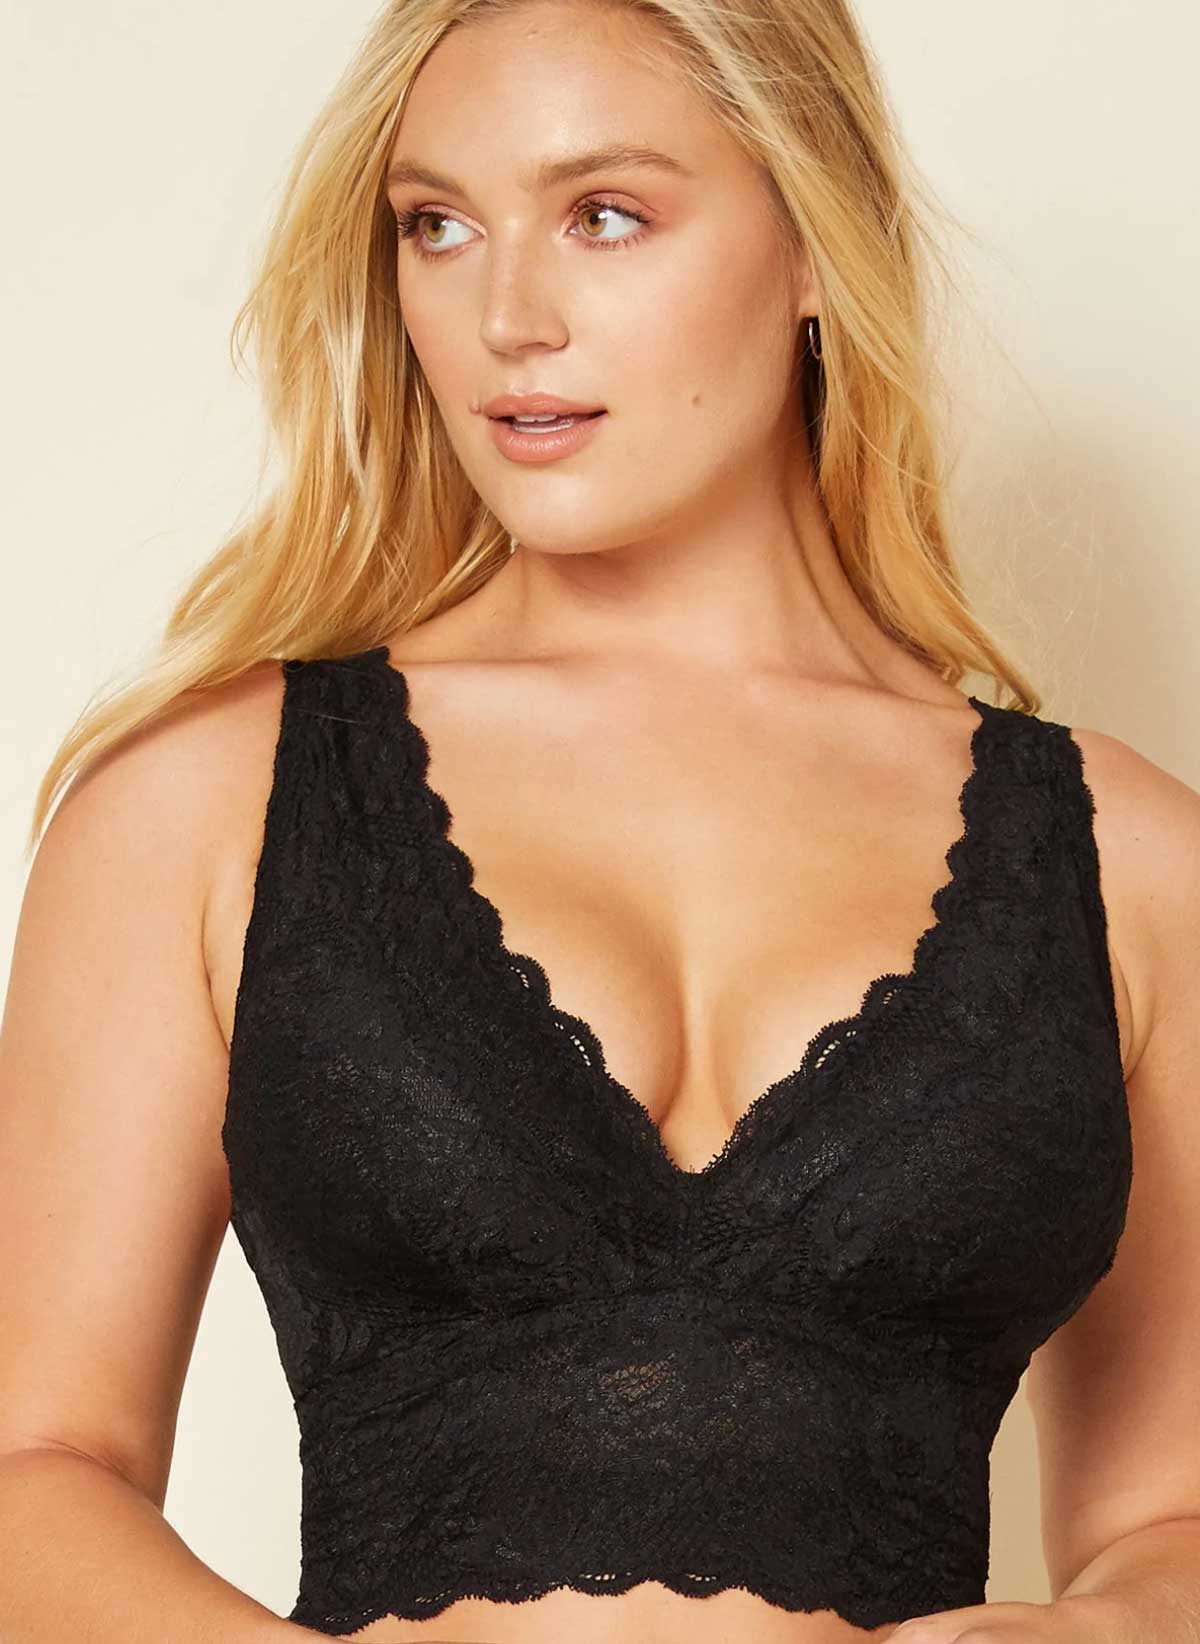 Cosabella + Never Say Never Extended Plungie Longline Bralette